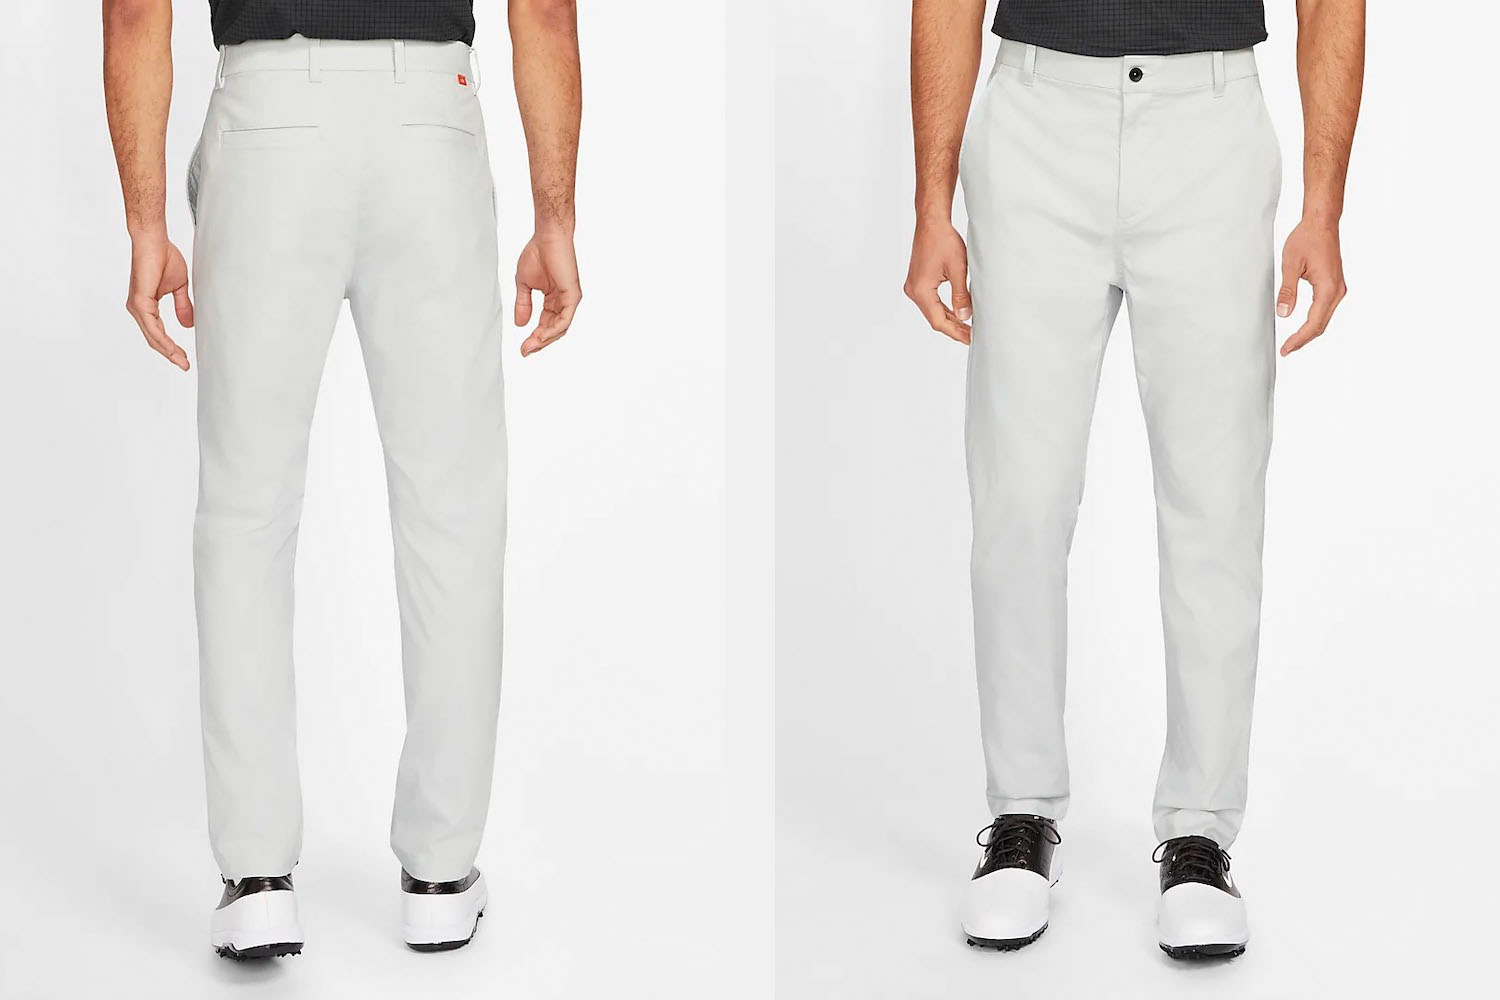 two model shots of a pair of stone colored Nike golf pants on a white background